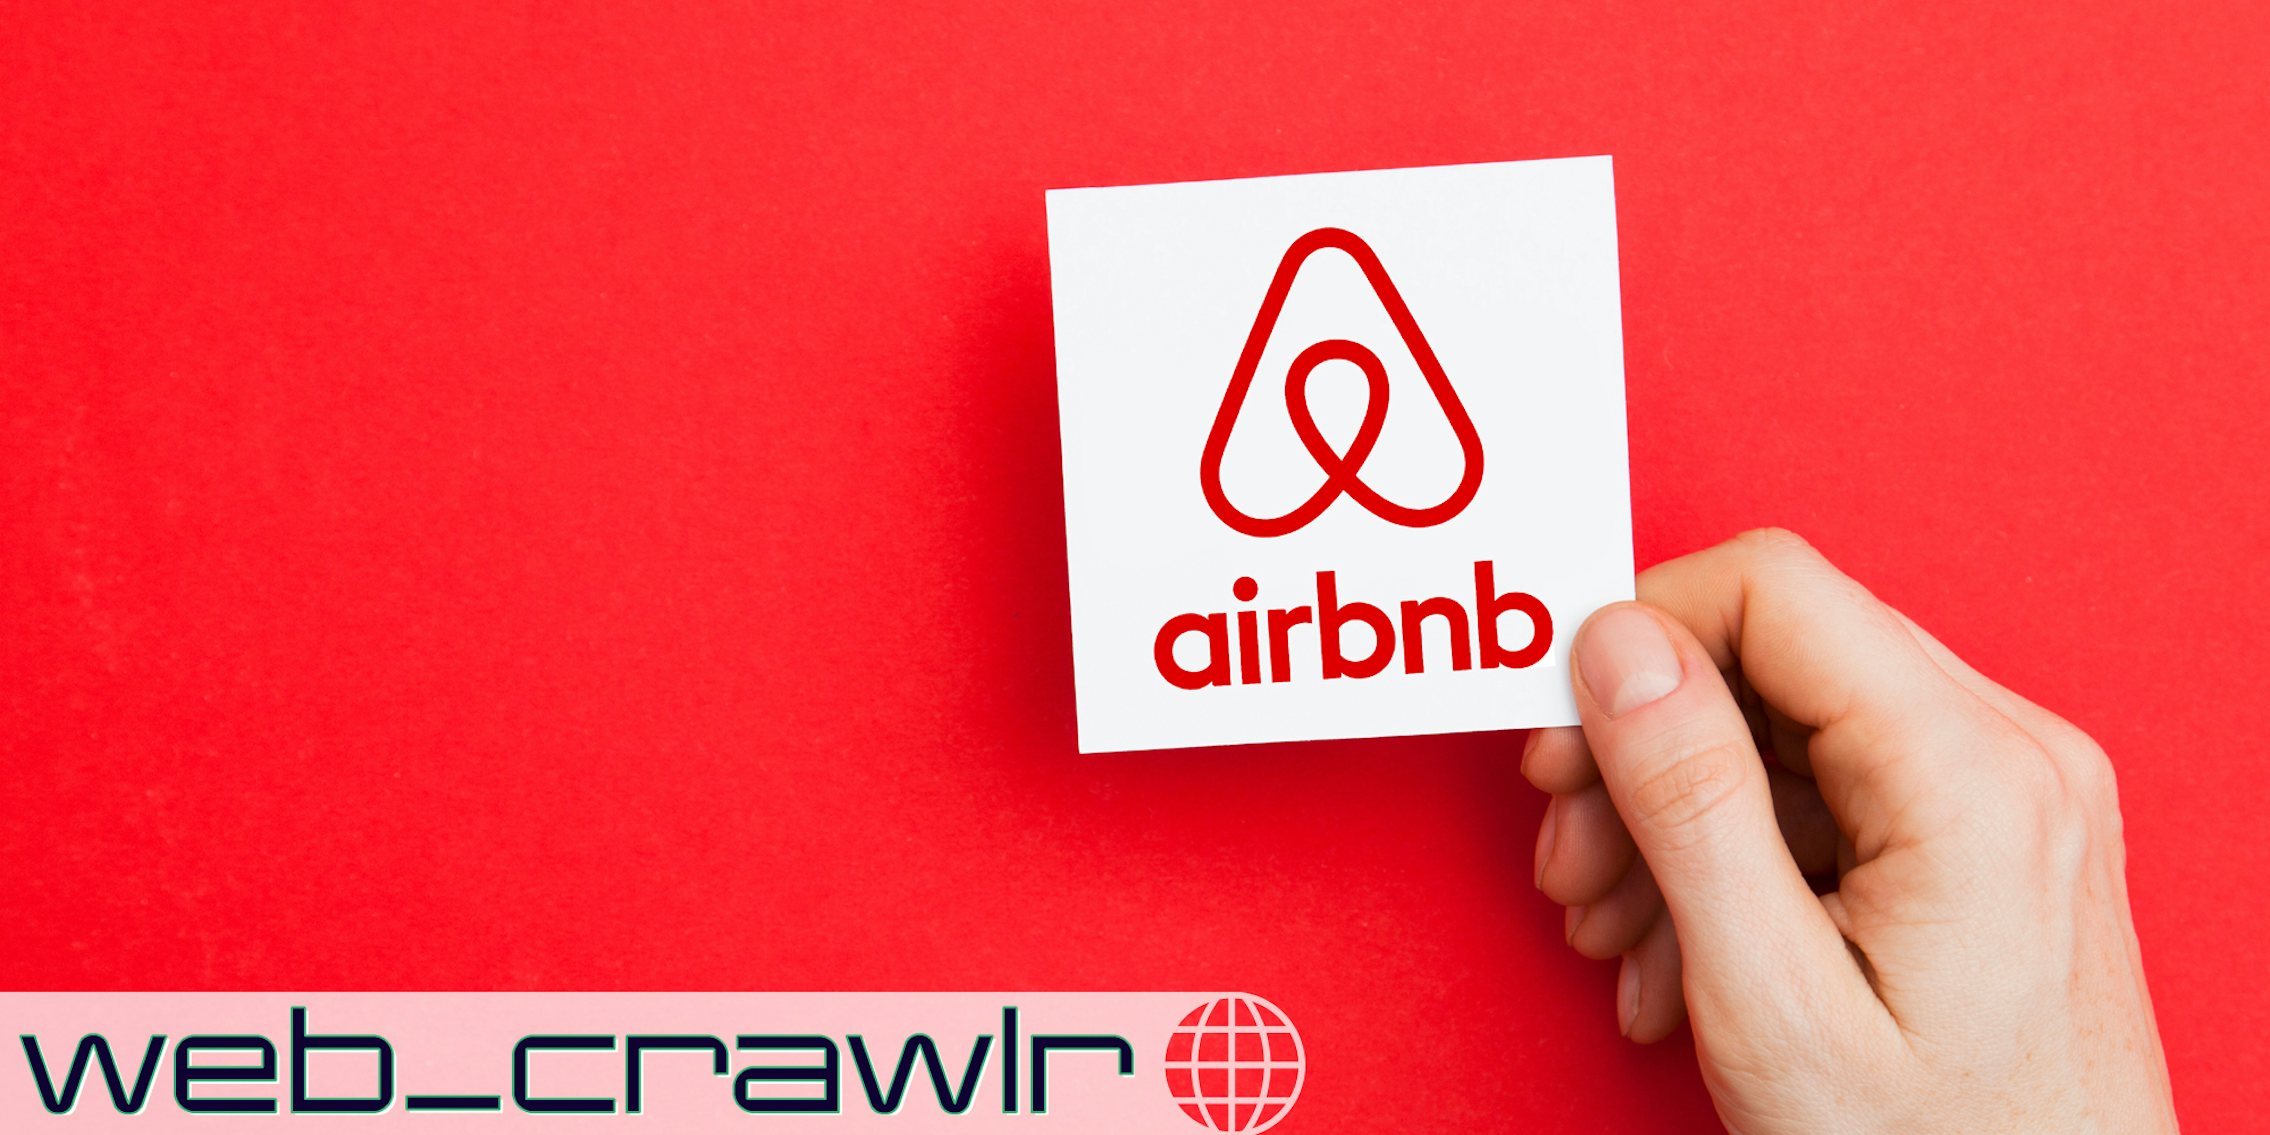 A hand holding an Airbnb card. The Daily Dot newsletter web_crawlr logo is in the bottom left corner.